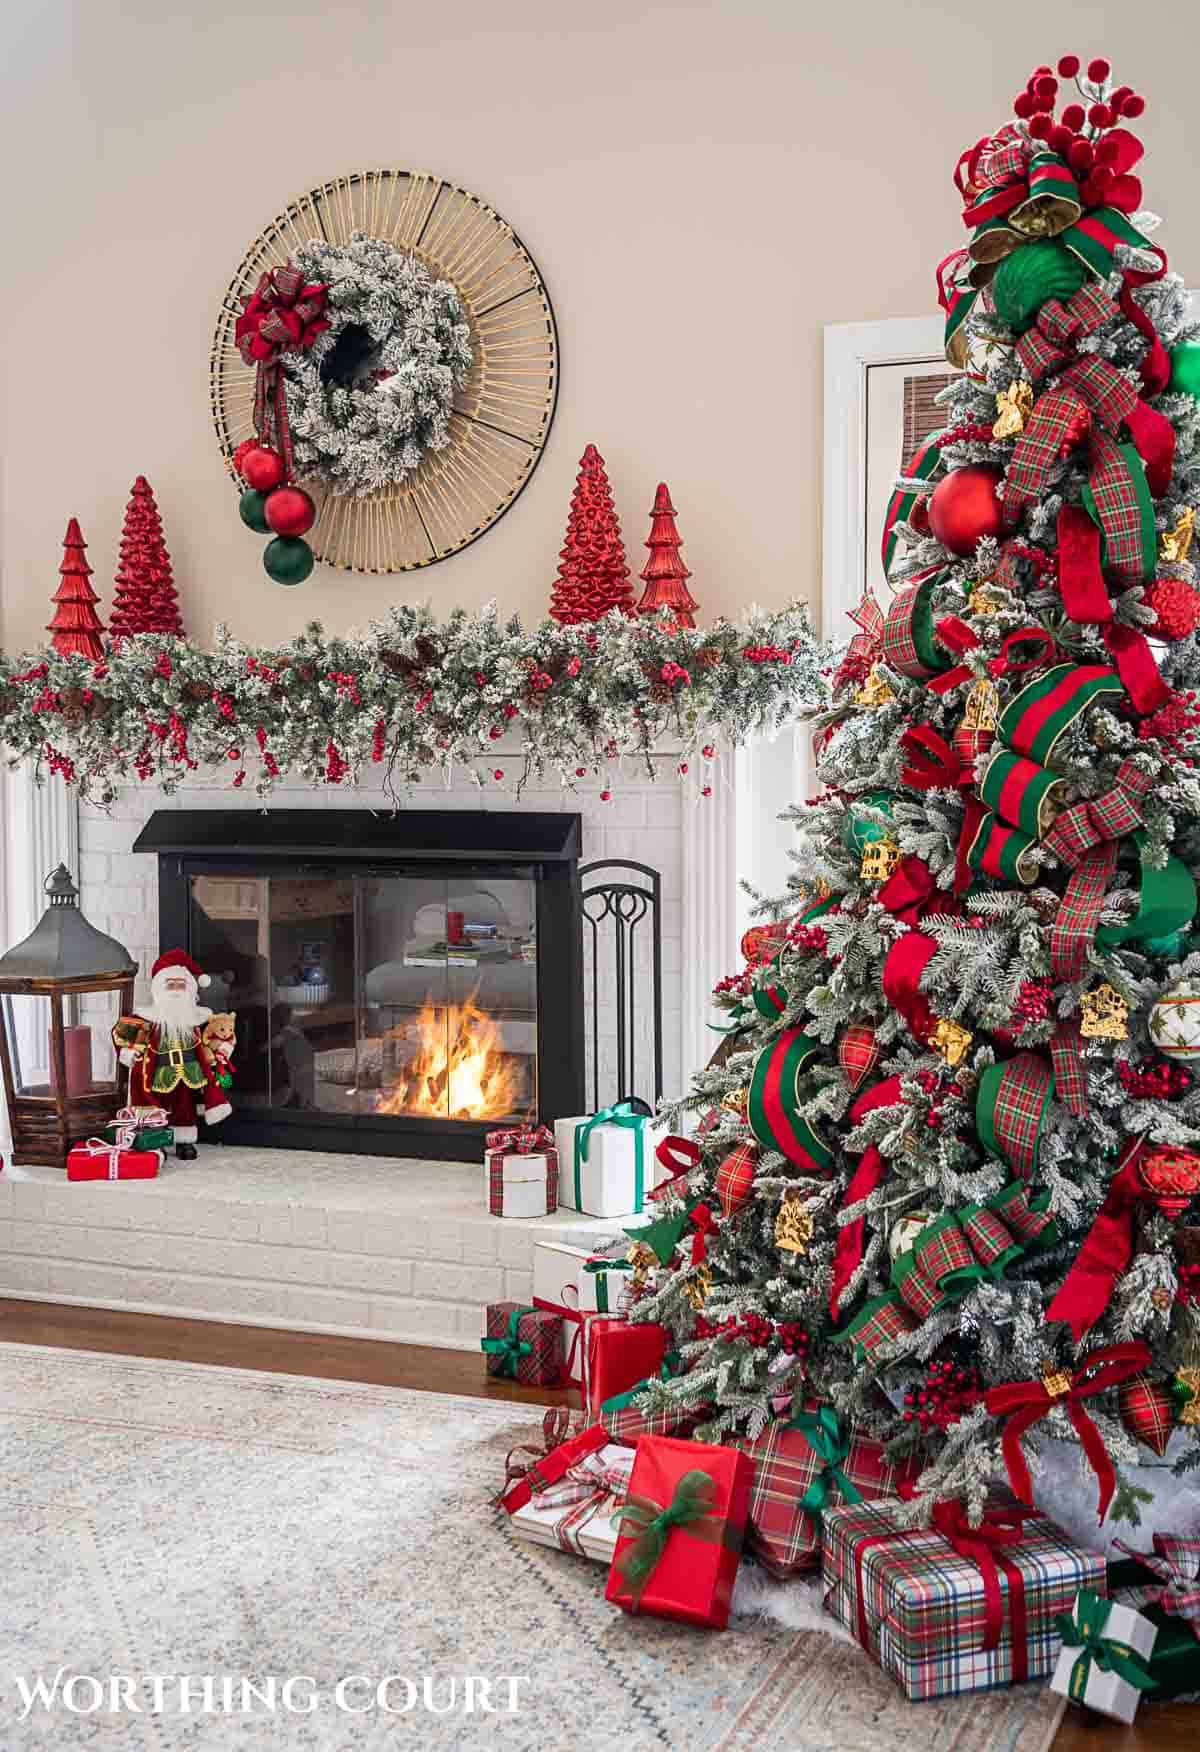 https://www.worthingcourtblog.com/wp-content/uploads/2022/12/red-and-green-Christmas-tree-red-and-green-Christmas-mantle-6.jpg